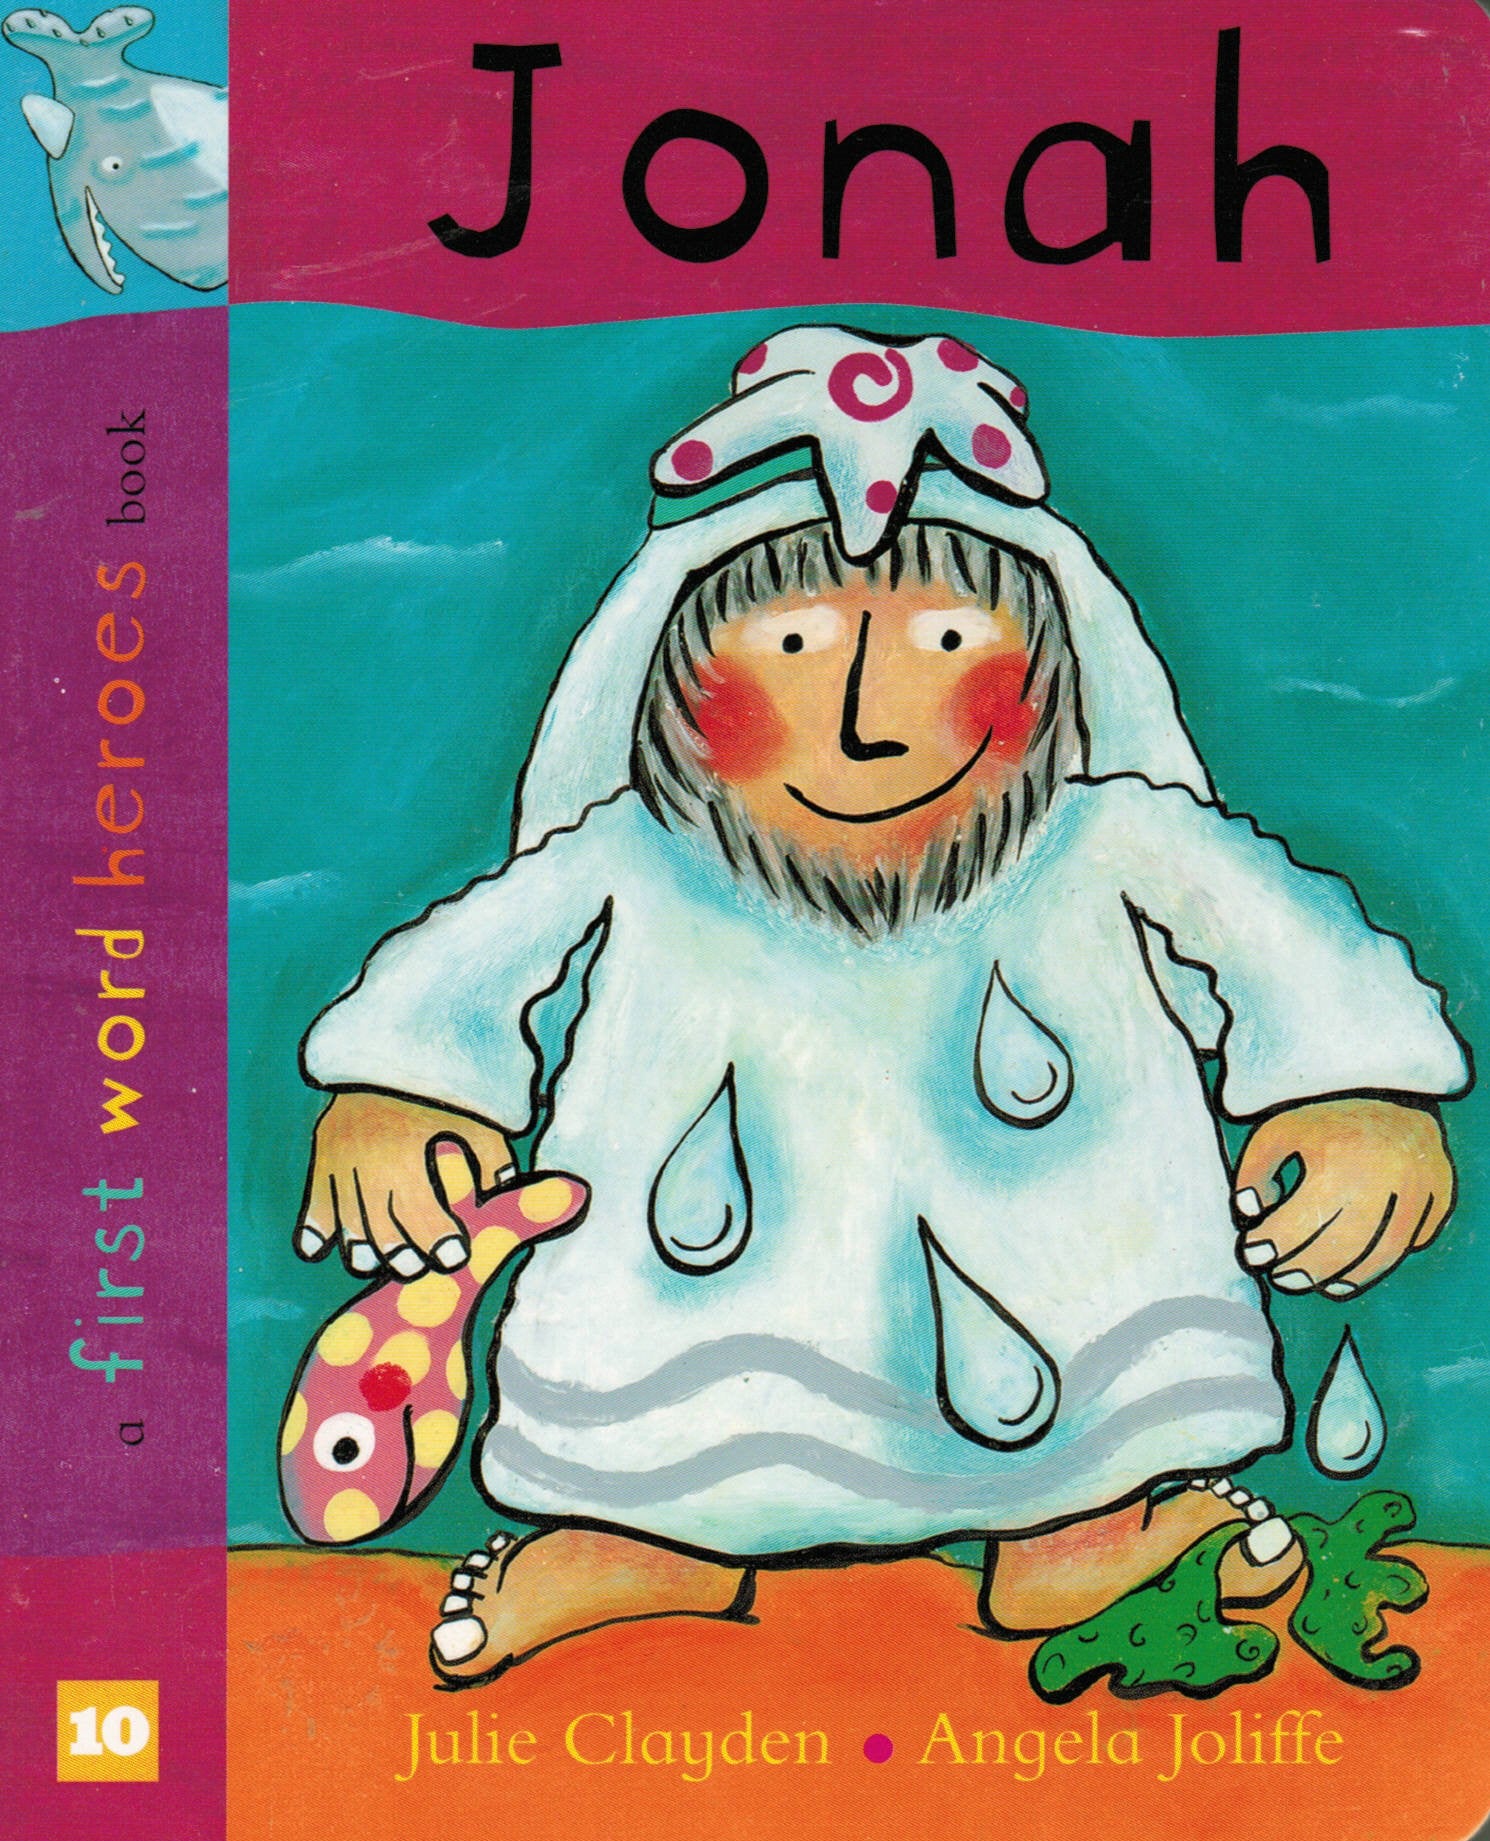 A First Word Heroes Book - Jonah